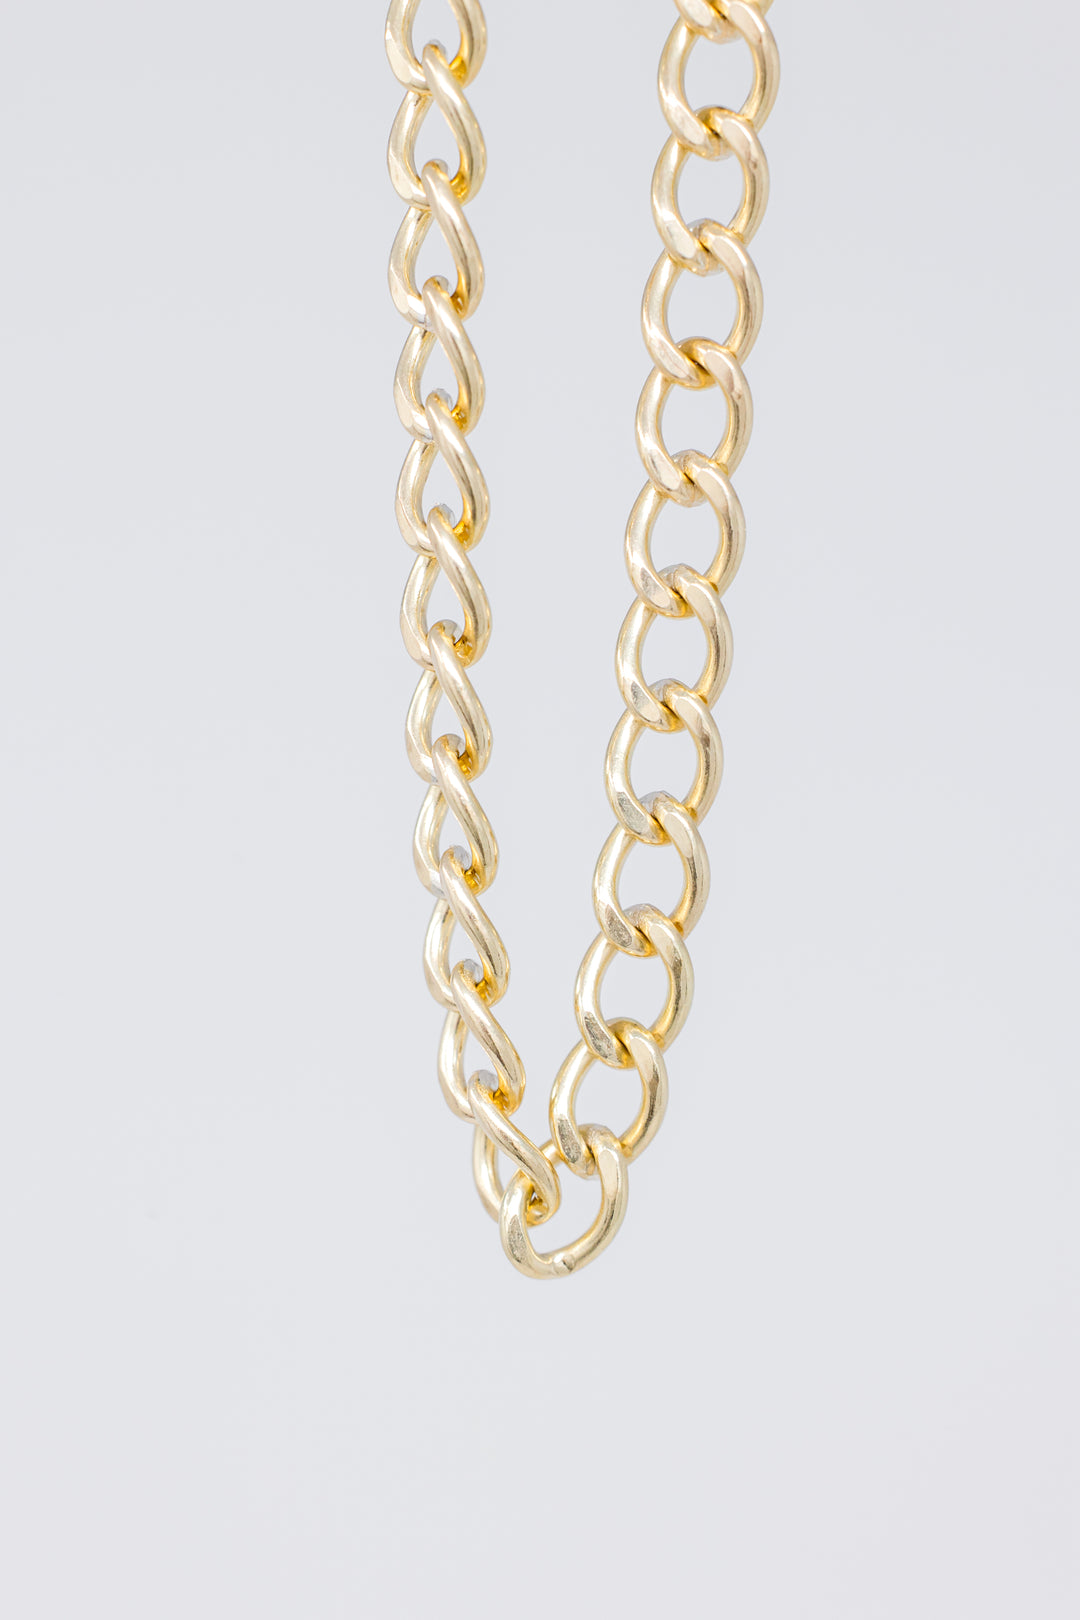 Gold Curb Chain Necklace